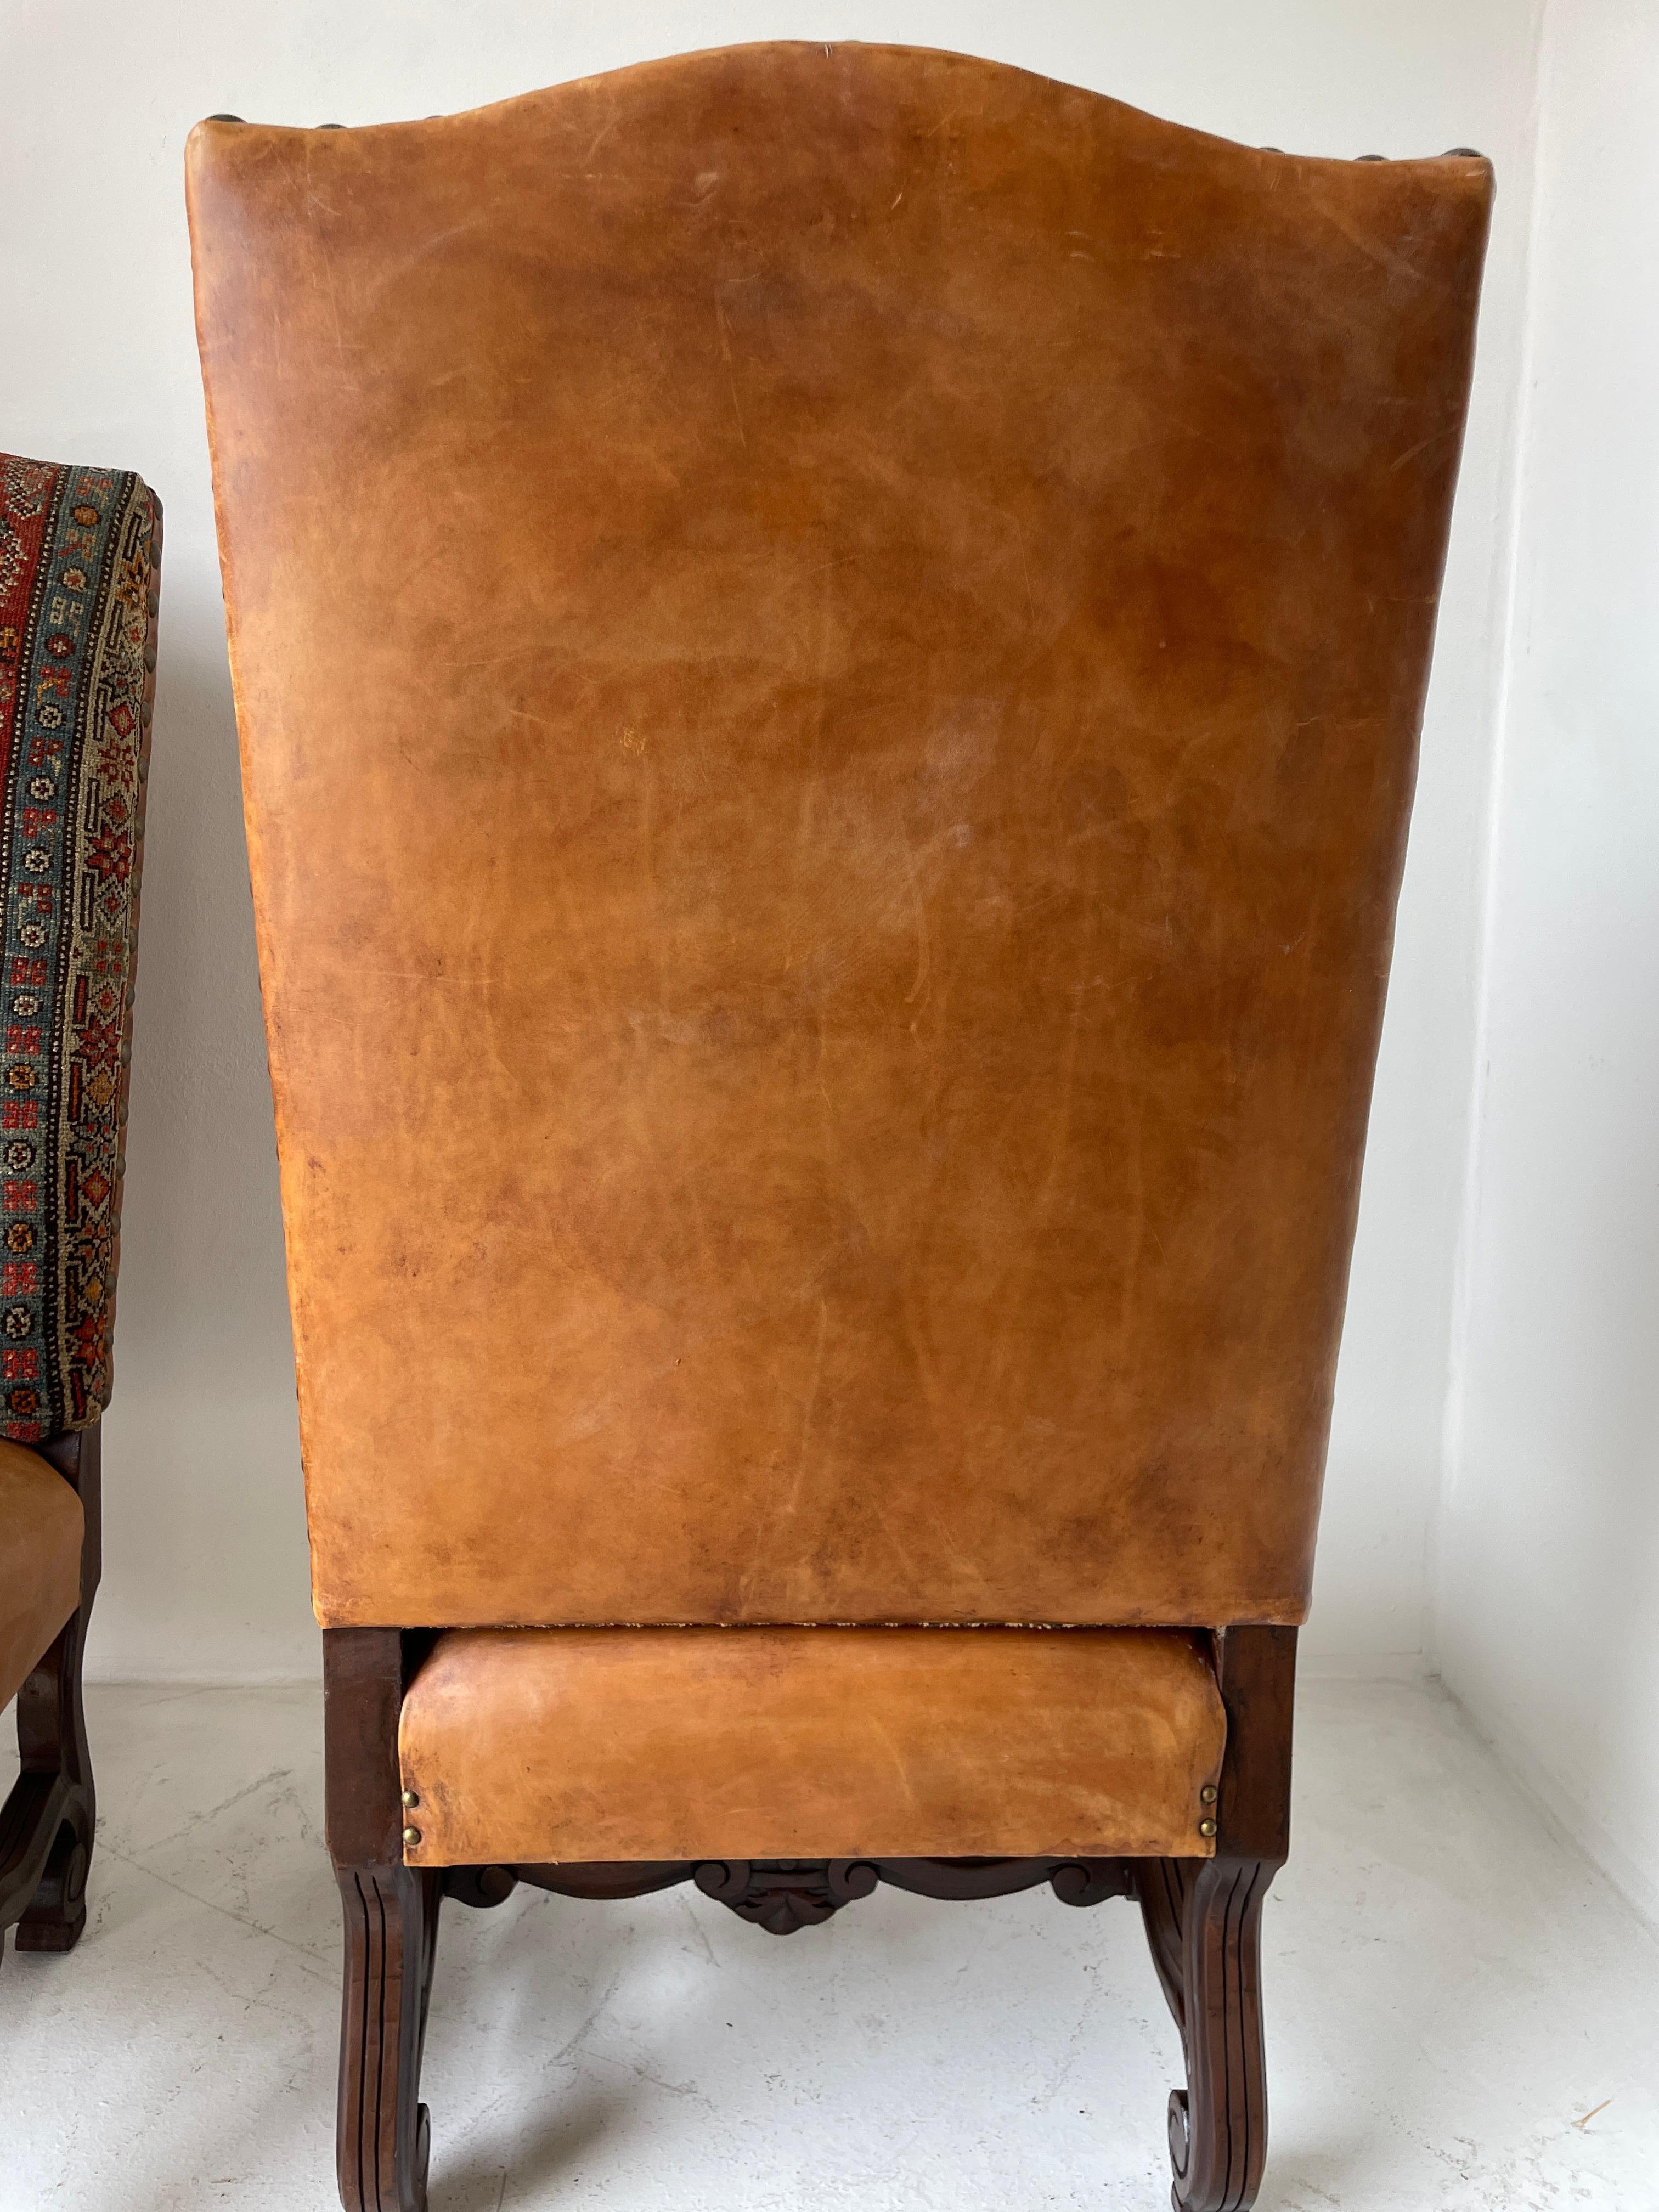 Carved Spanish Colonial Walnut Hall Chairs Leather and Tapestry Covered a Pair 1940s